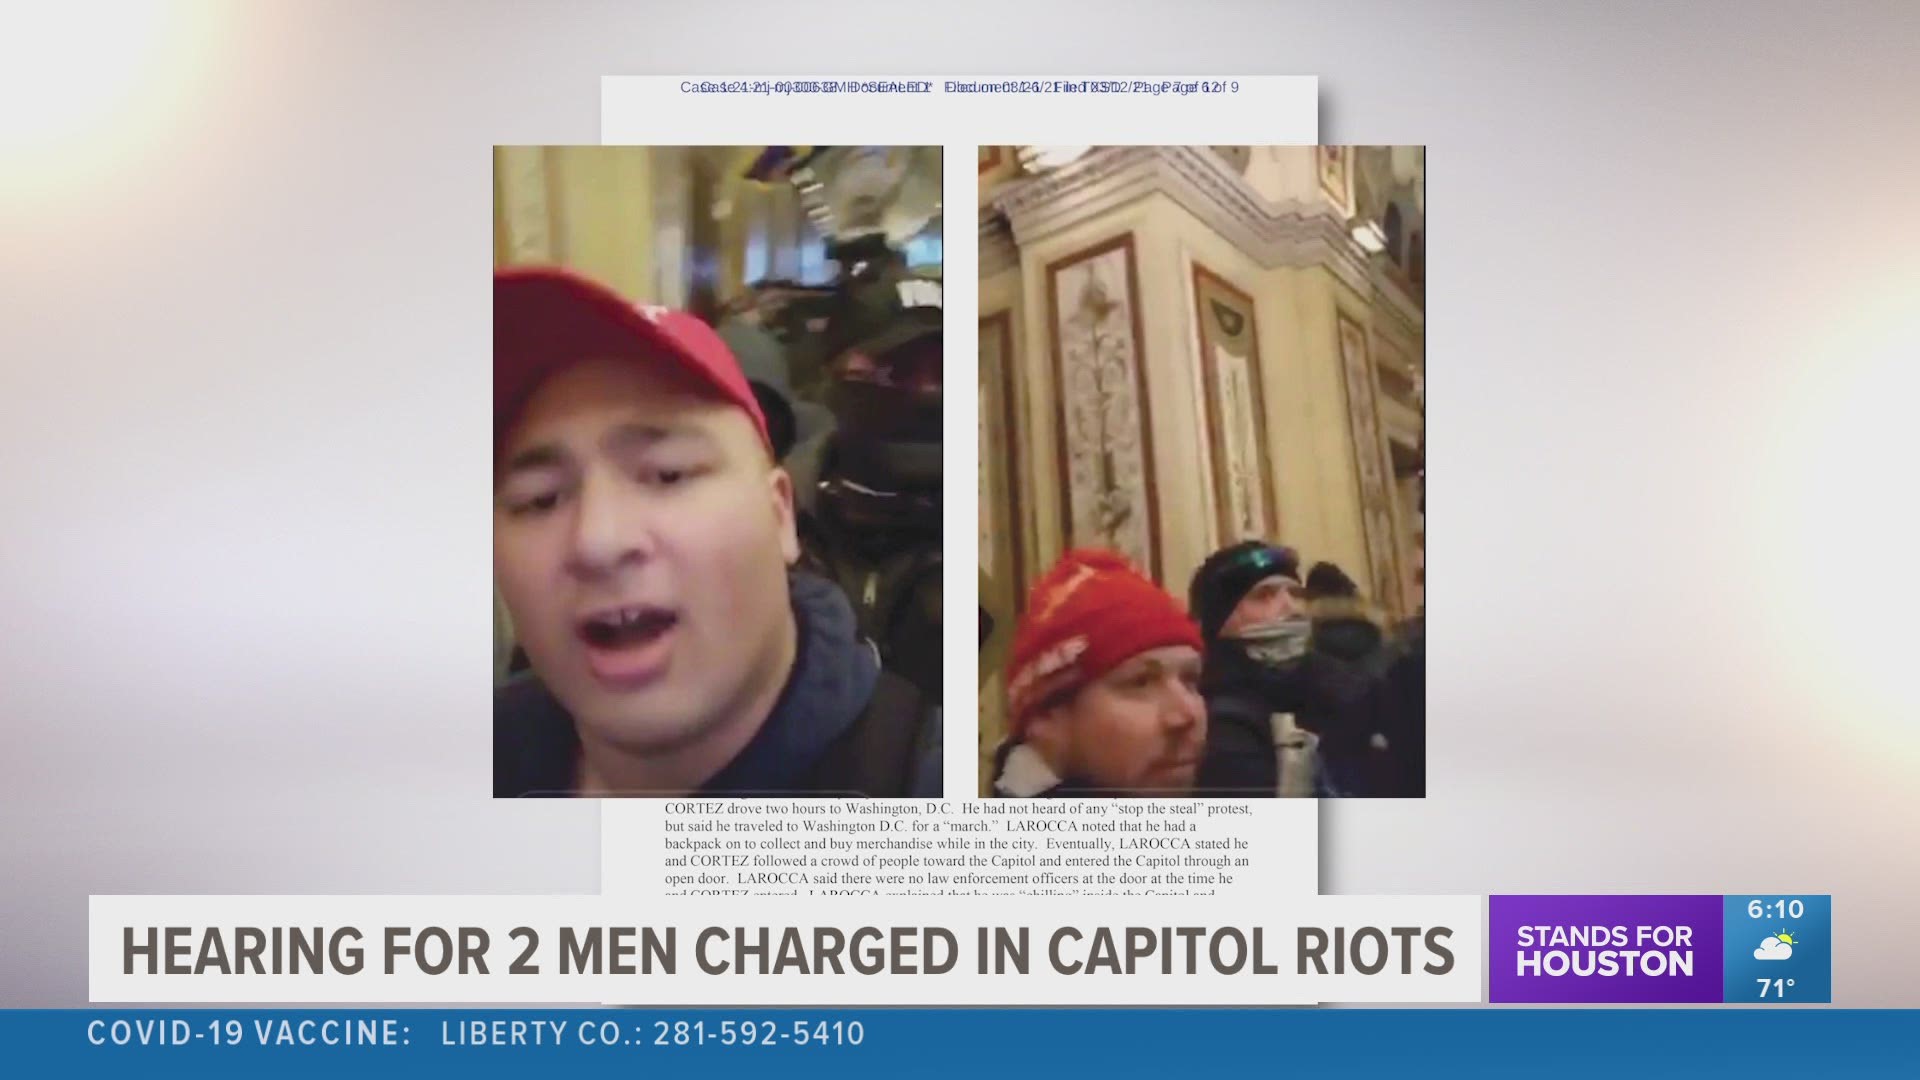 Benjamin Larocca and Christian Cortez were arrested last week. On Monday afternoon, Cortez appeared in federal court on charges stemming from the Capitol riots.